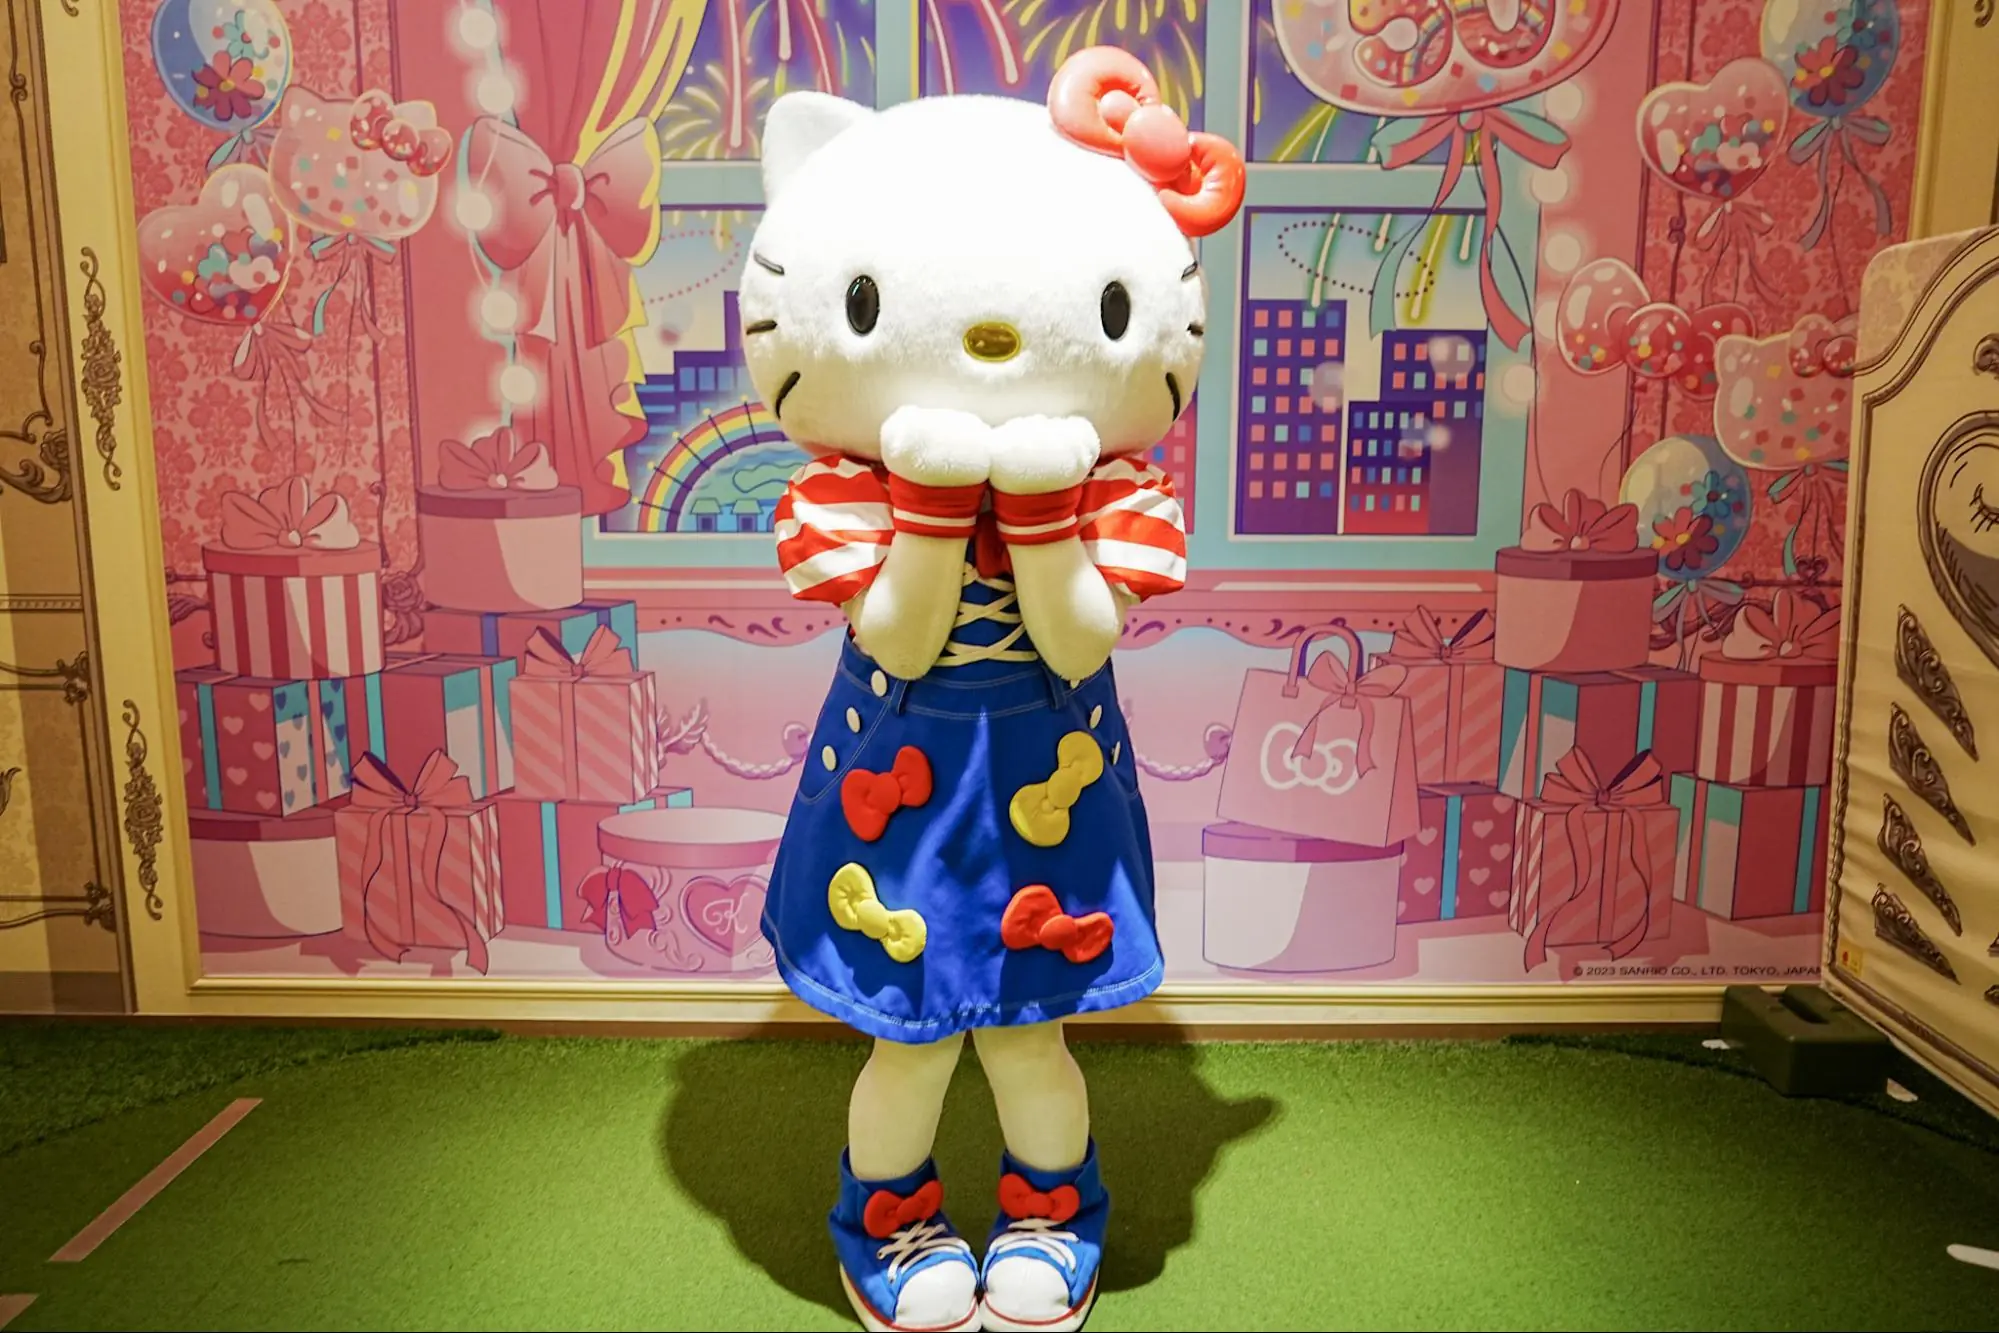 [Sanrio Puroland] The event &quot;Hello Kitty 50th Anniversary&quot; is being held!